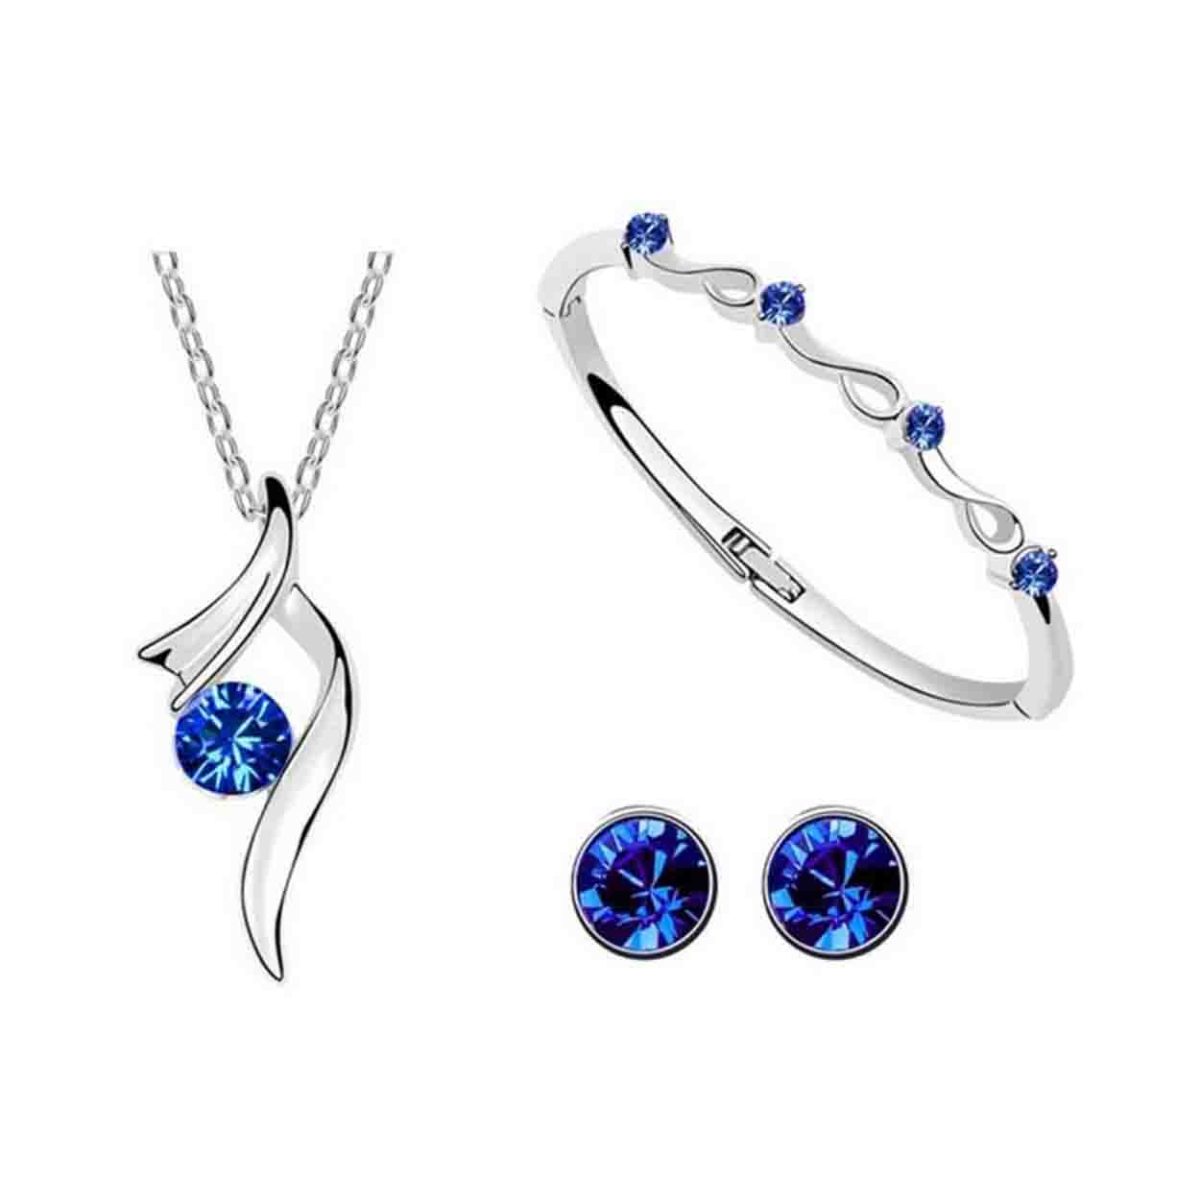 A blue glass and silver metal bracelet, earrings and necklace set in a gift box